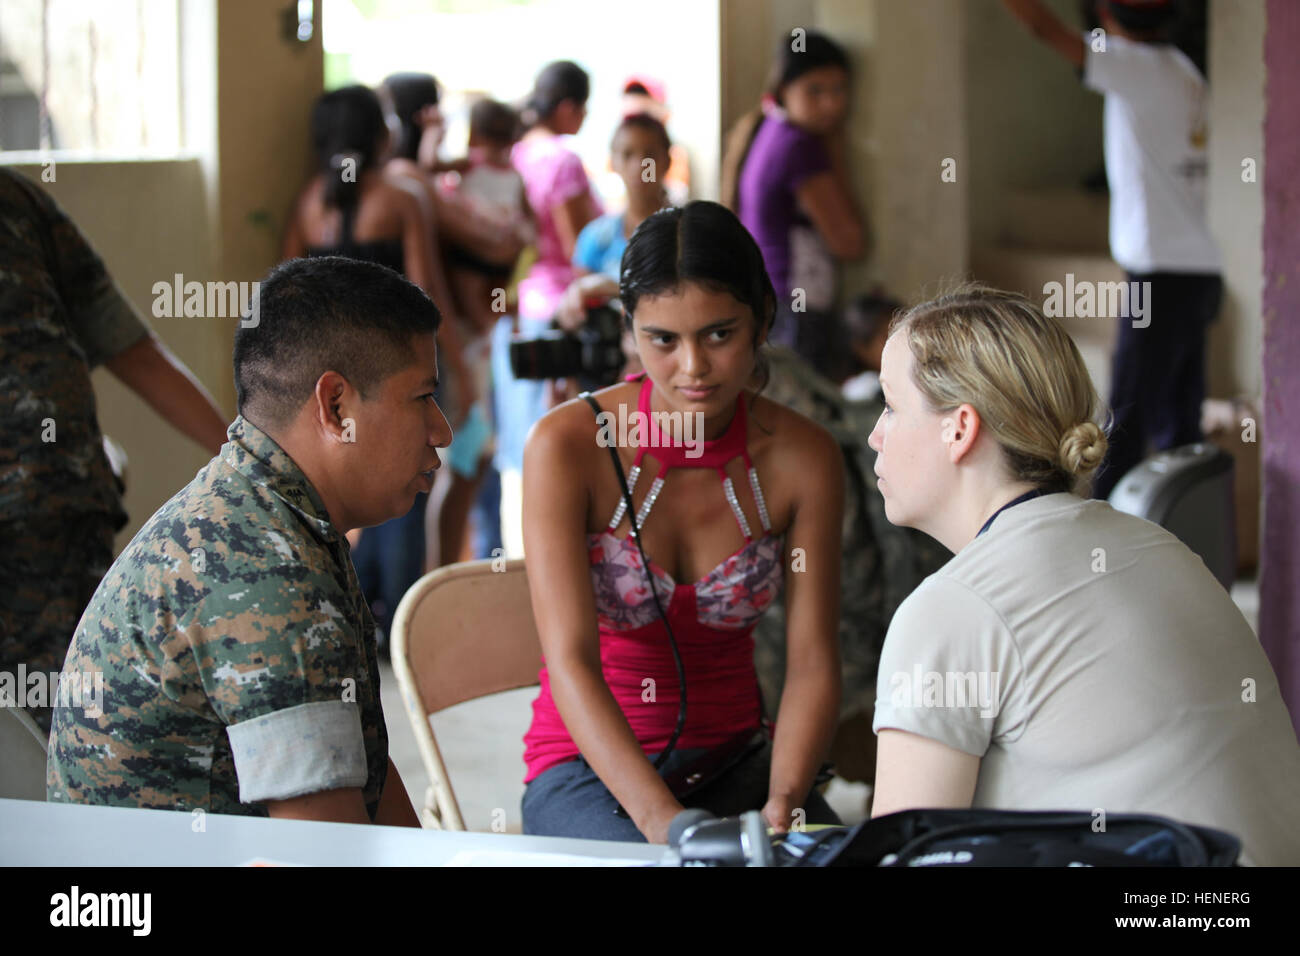 U.S Air Force Capt. Diana Meda of the 60th MDOS, speaks with a Guatemalan Solider as he translated for a Local women attending a Medical Readiness Exercise during Beyond the Horizon, Gualan, Guatemala, April 22, 2014.  Beyond the Horizon is an annual exercise that embraces the partnership between the United States and Guatemala, to provide focused humanitarian assistance through various medical, dental, and civic action programs. (U.S. Army photo by Sgt. Cameron Boyd/released) Beyond The Horizon 2014, Guatemala 140421-A-TH742-007 Stock Photo